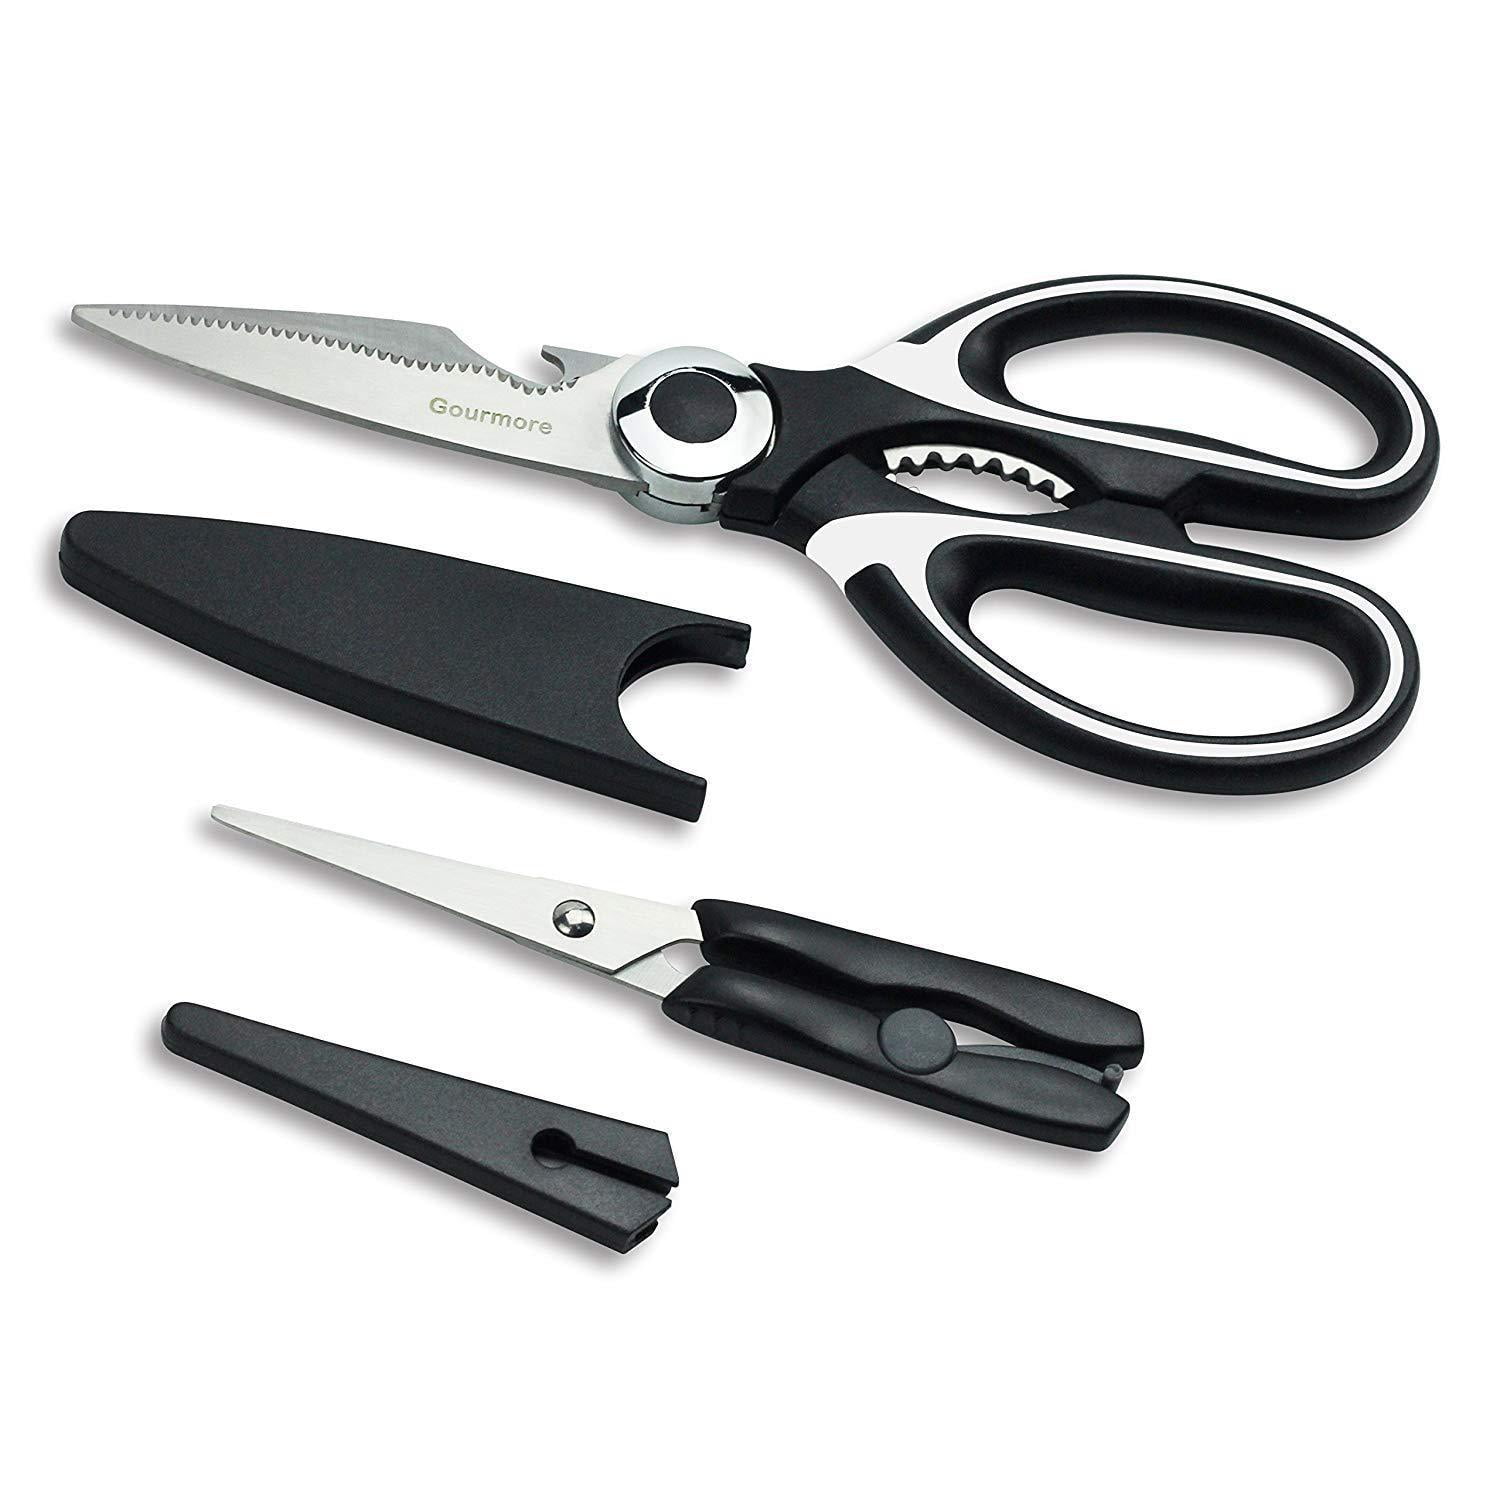 Tovolo Elements Heavy Duty Kitchen Shears with Sheath for Food Prep  Trimming Meat and Vegetables, Small, Charcoal, Blueberry